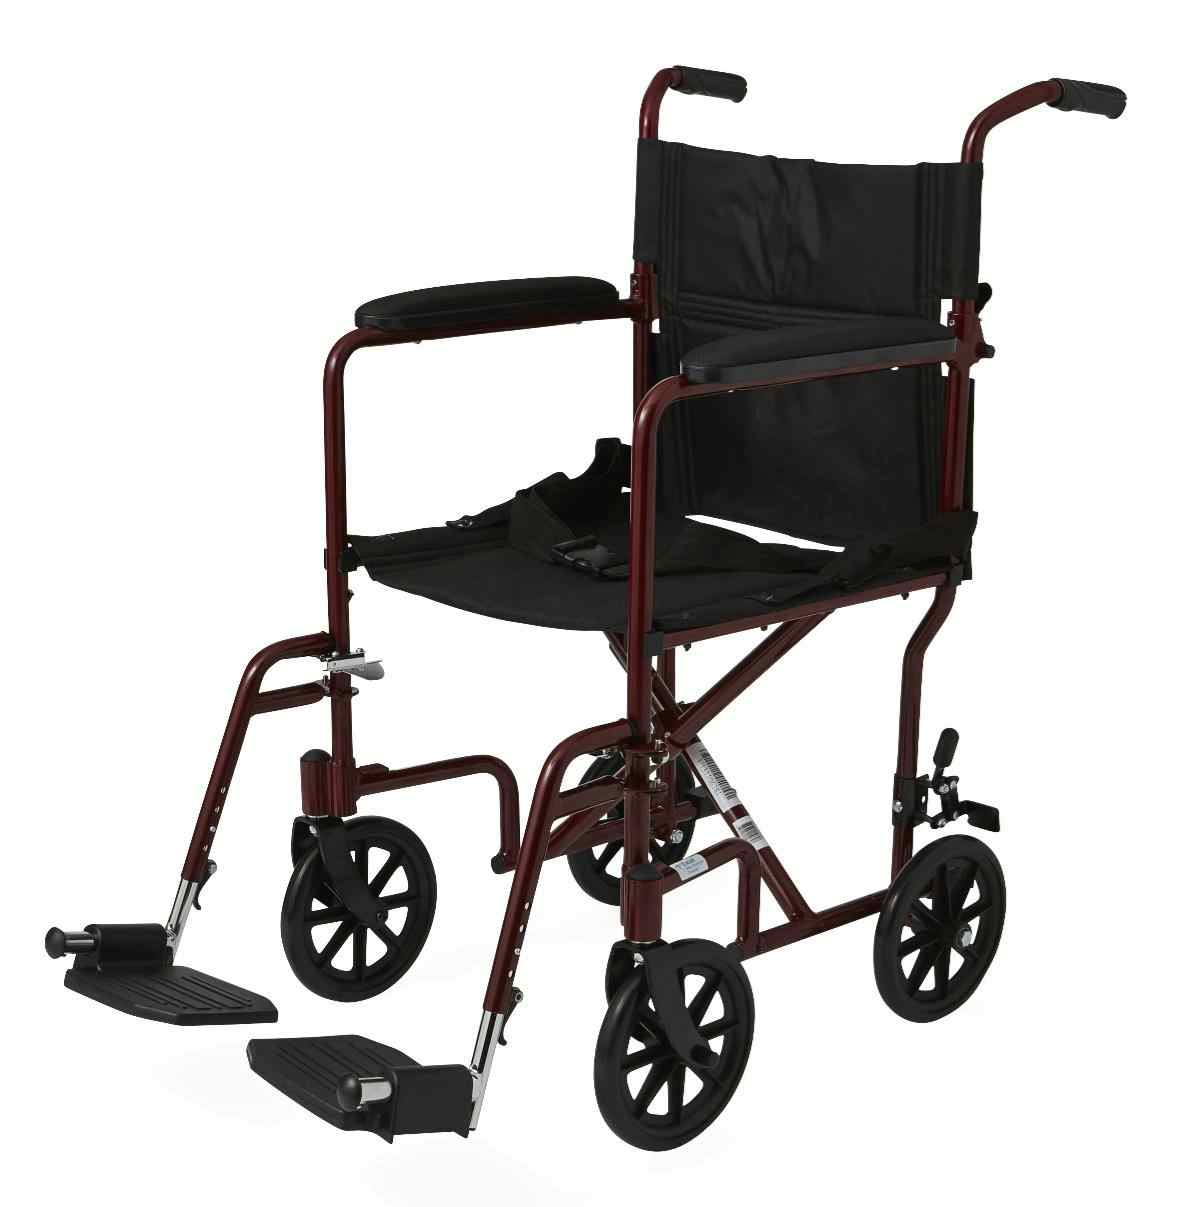 Medline Basic Transport Chair, Permanent Armrests, Detachable Swing-Away Footrests, 8", MDS808200ARE, Red - 1 Each